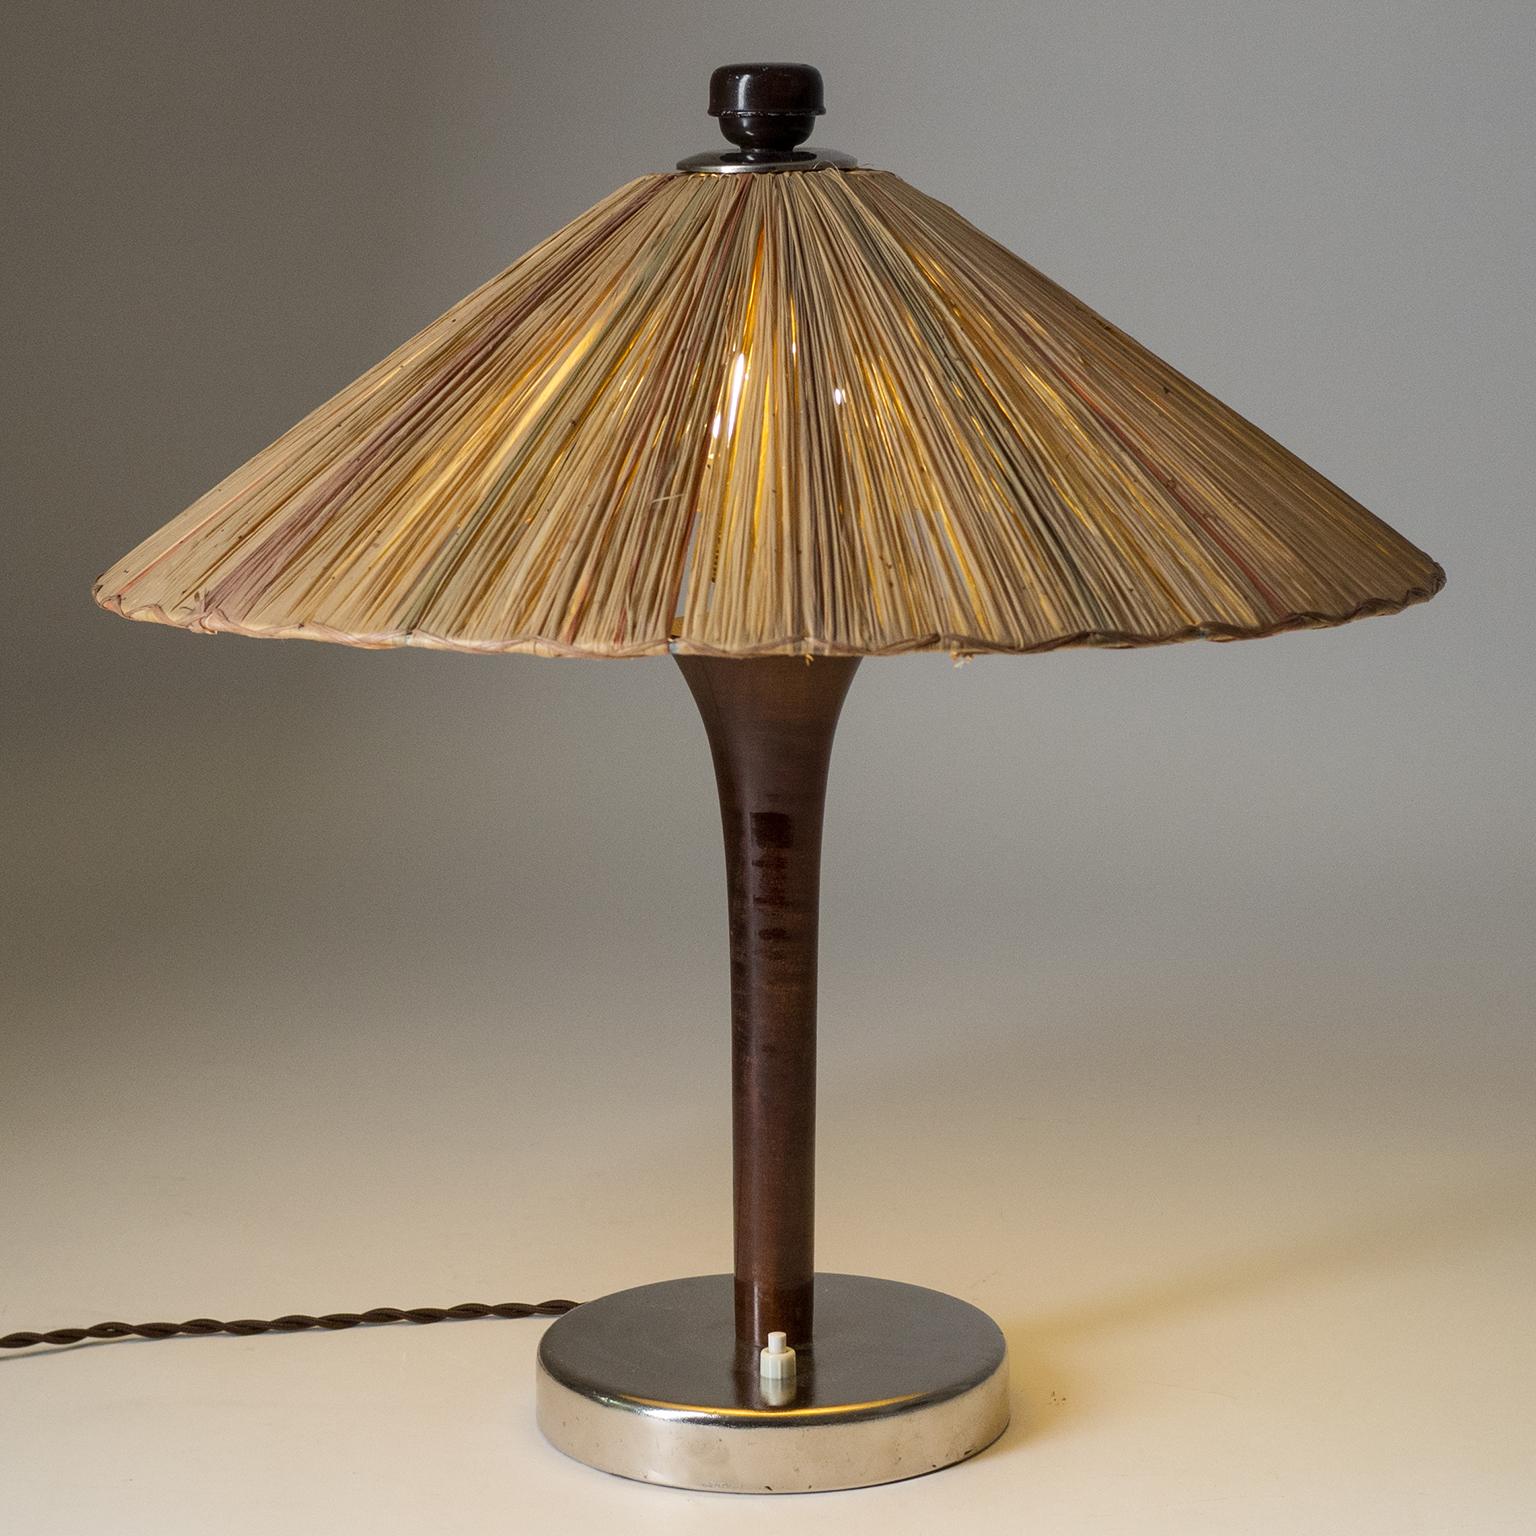 Art Deco Table Lamp, 1930s, with Original Straw Shade 3